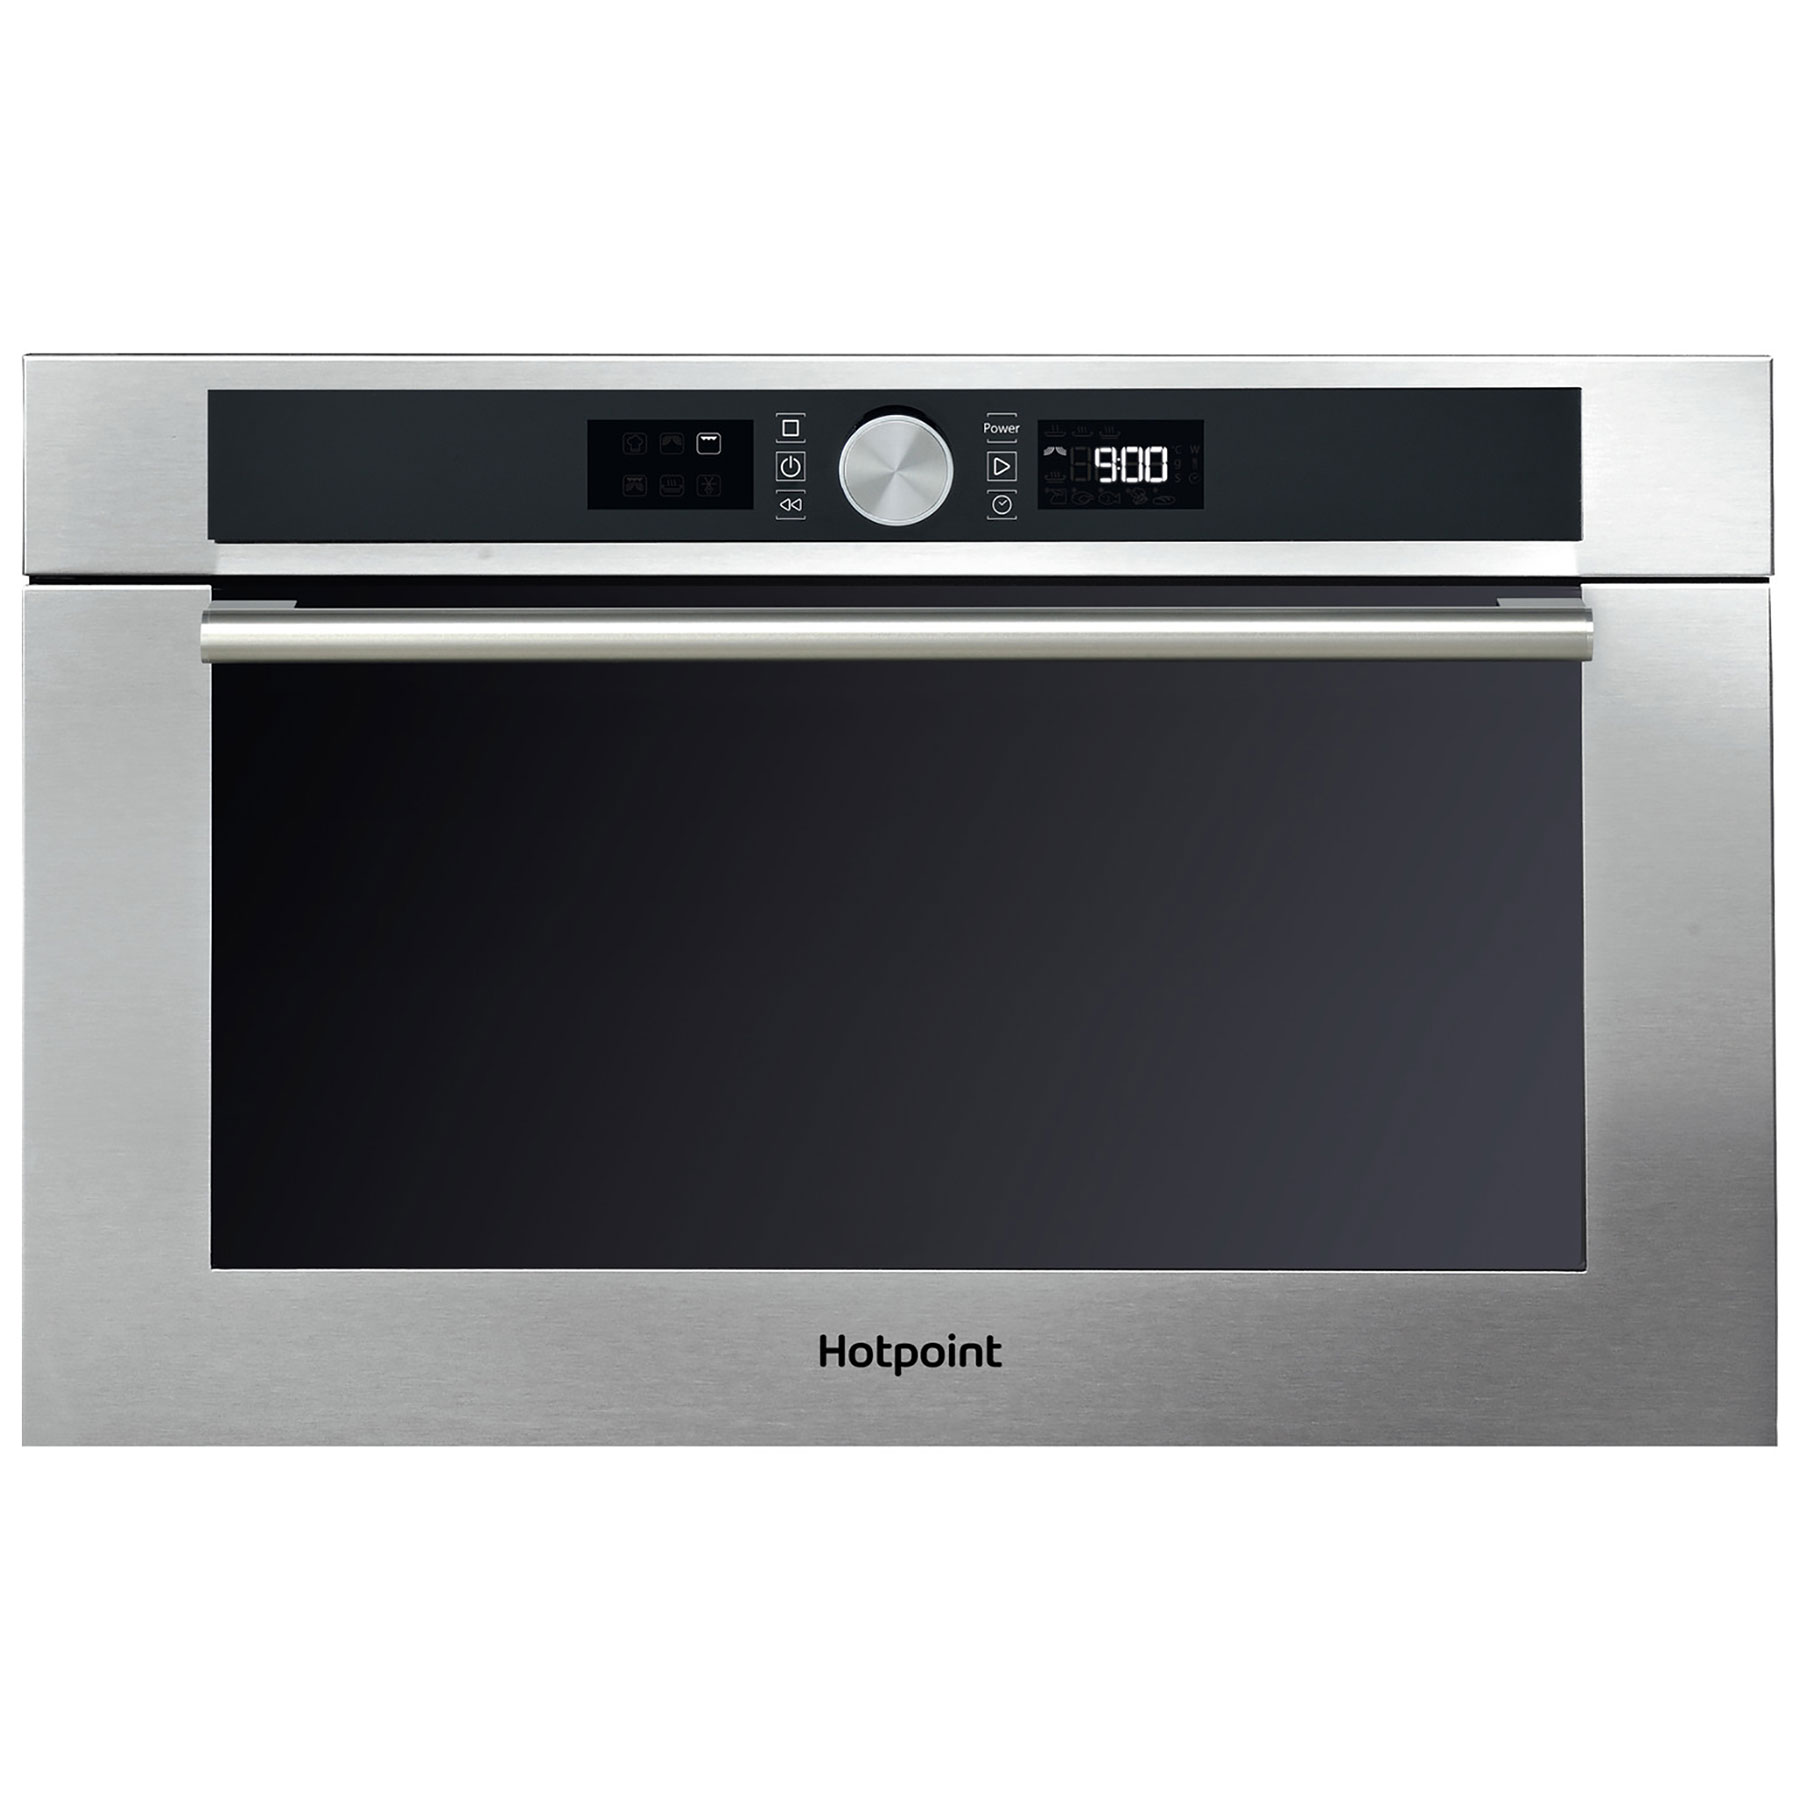 Hotpoint MD454IXH Built In Microwave Oven Grill in St Steel 31L 1000W